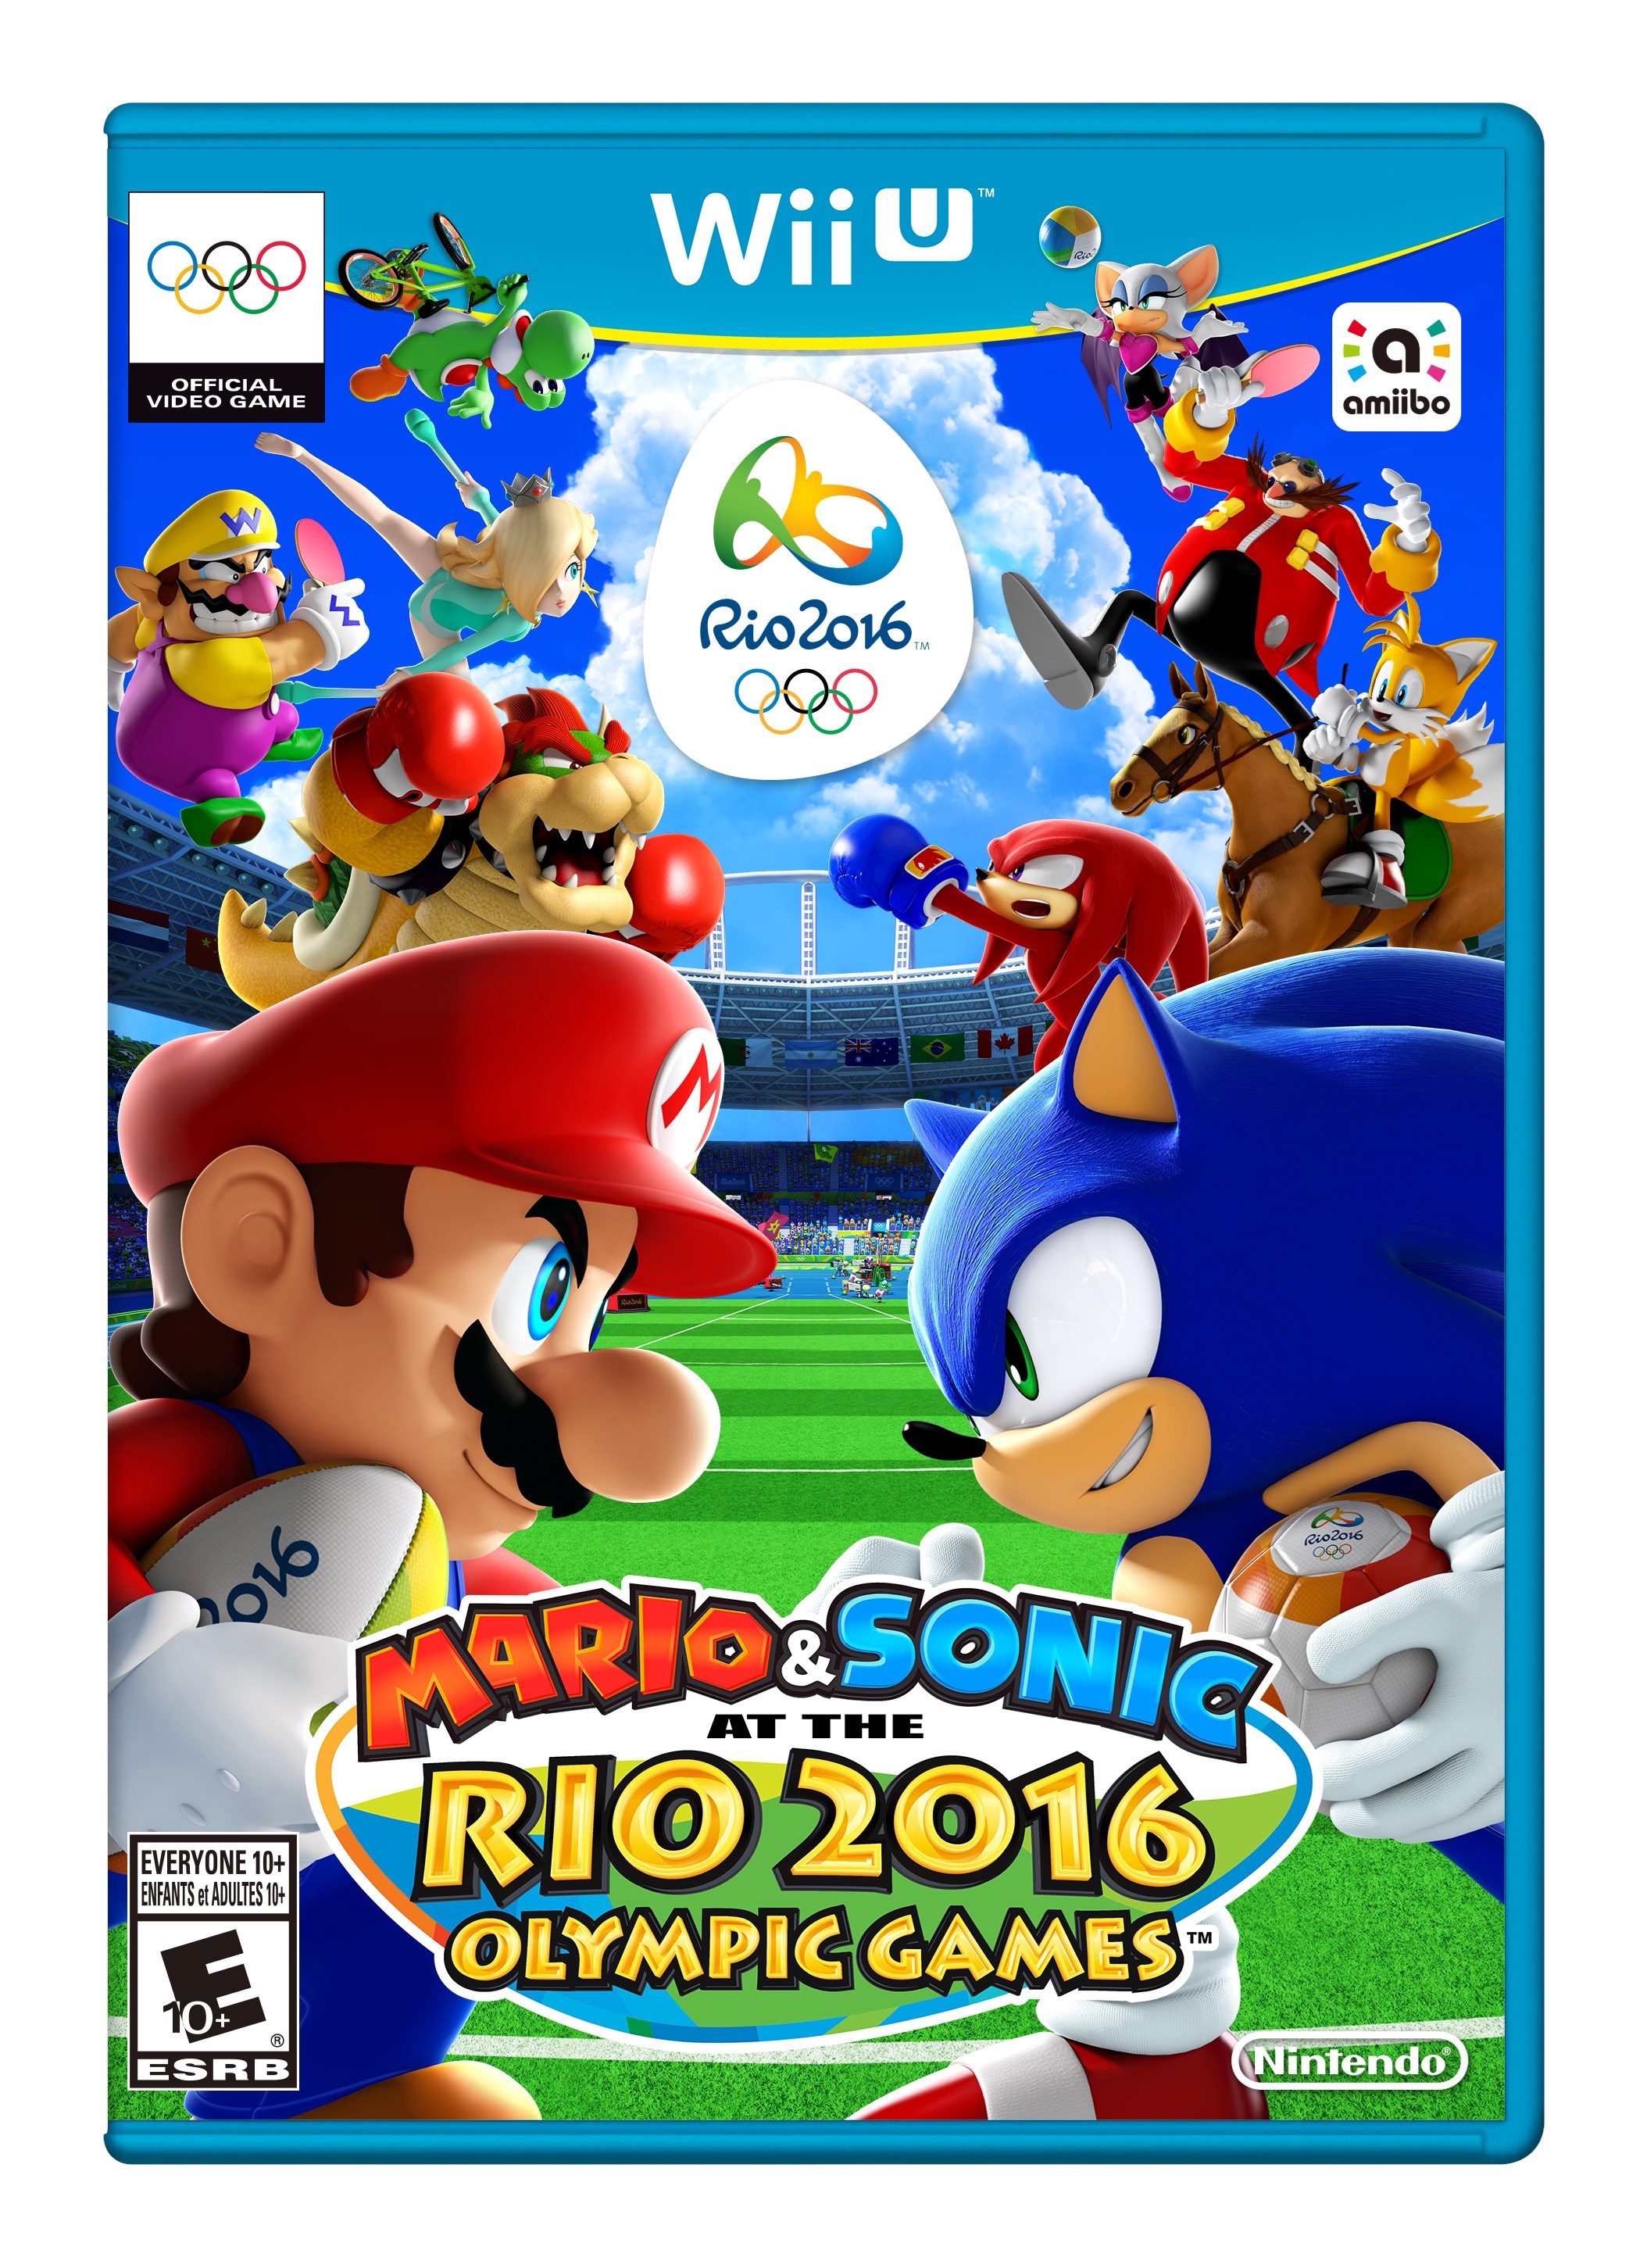 mario and sonic at the rio 2016 olympic games 3ds